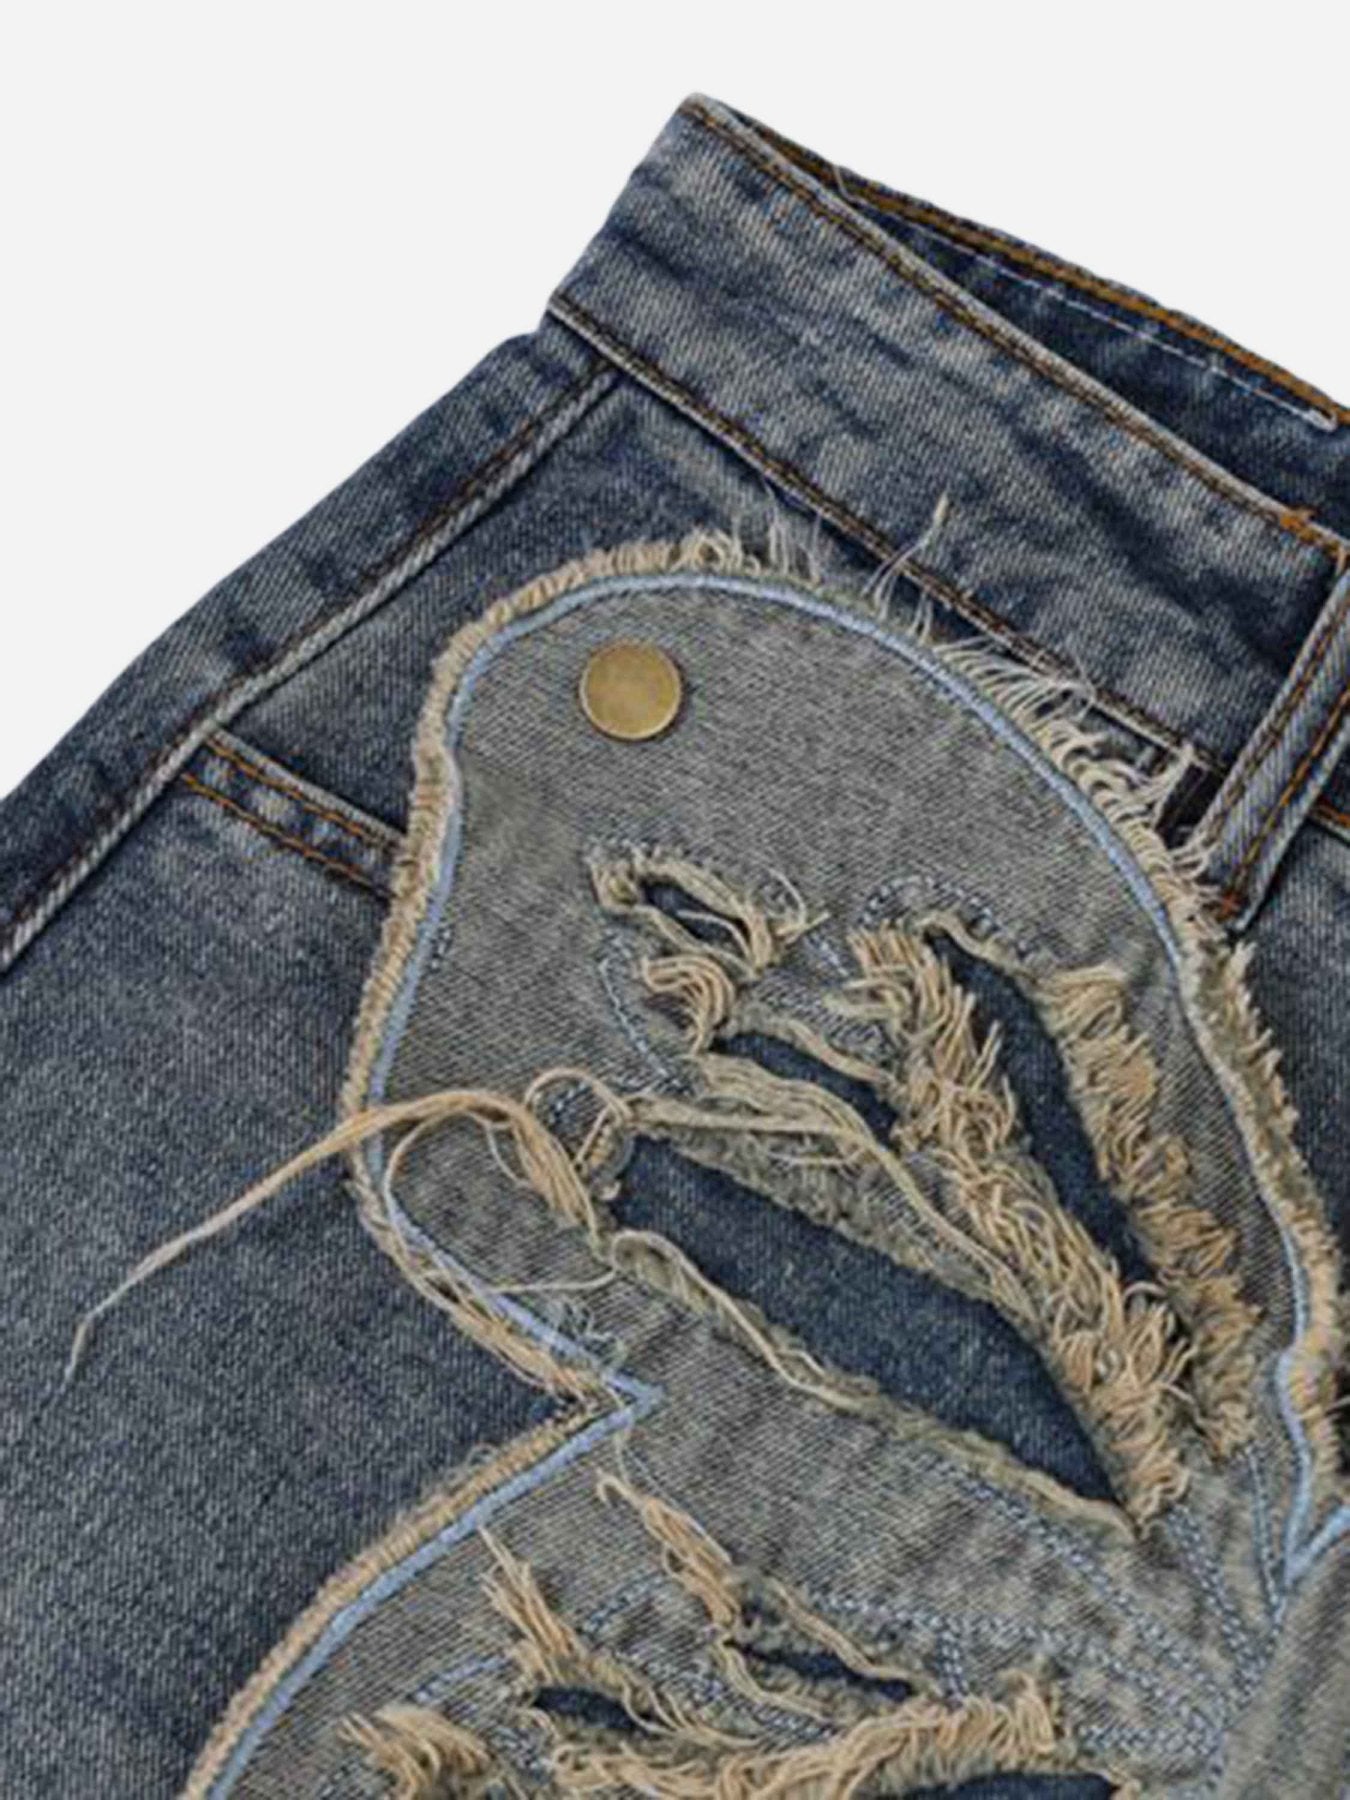 The Supermade Appliqued Butterfly Embroidered Jeans